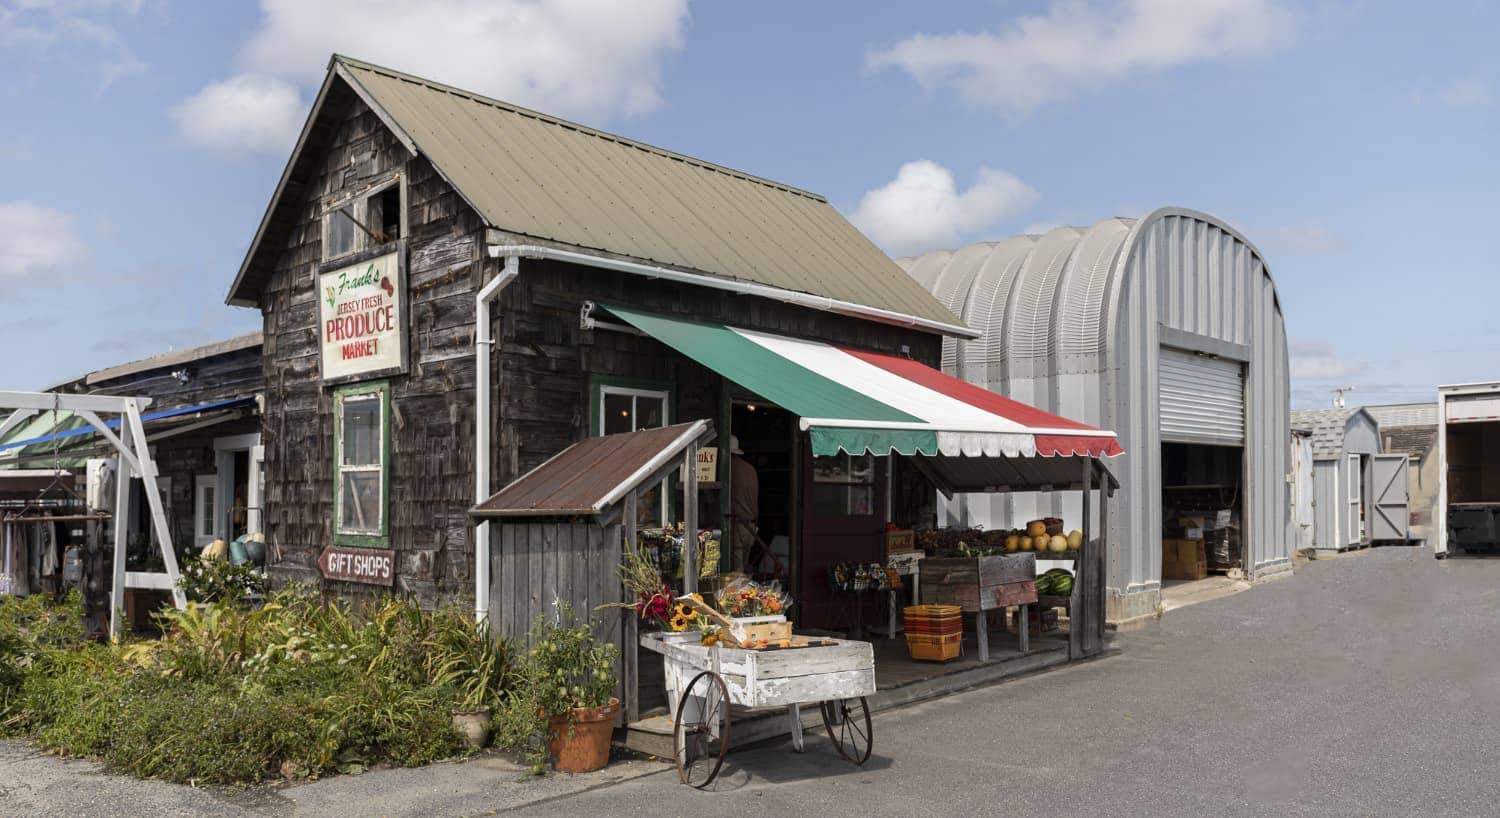 Small building selling produce and gifts with weathered cedar shake siding and green, white, and red awning